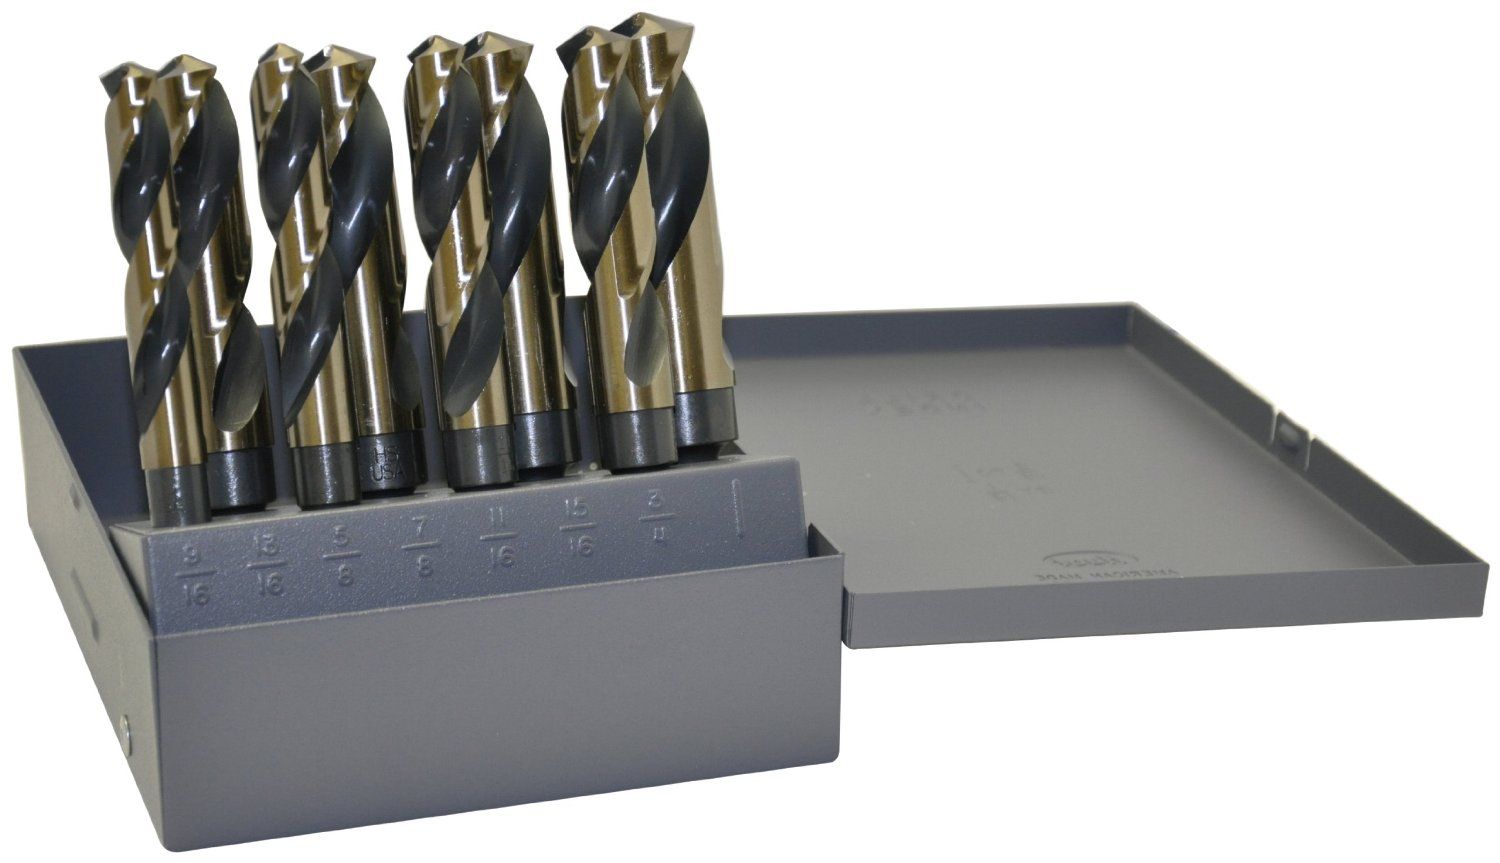 High Speed Steel 1” by 1/16th Increment | SAE Size 9/16” HSS Best Choice 8-Piece 1/2” Shank Silver and Deming Drill Bit Set in Aluminum Carry Case 